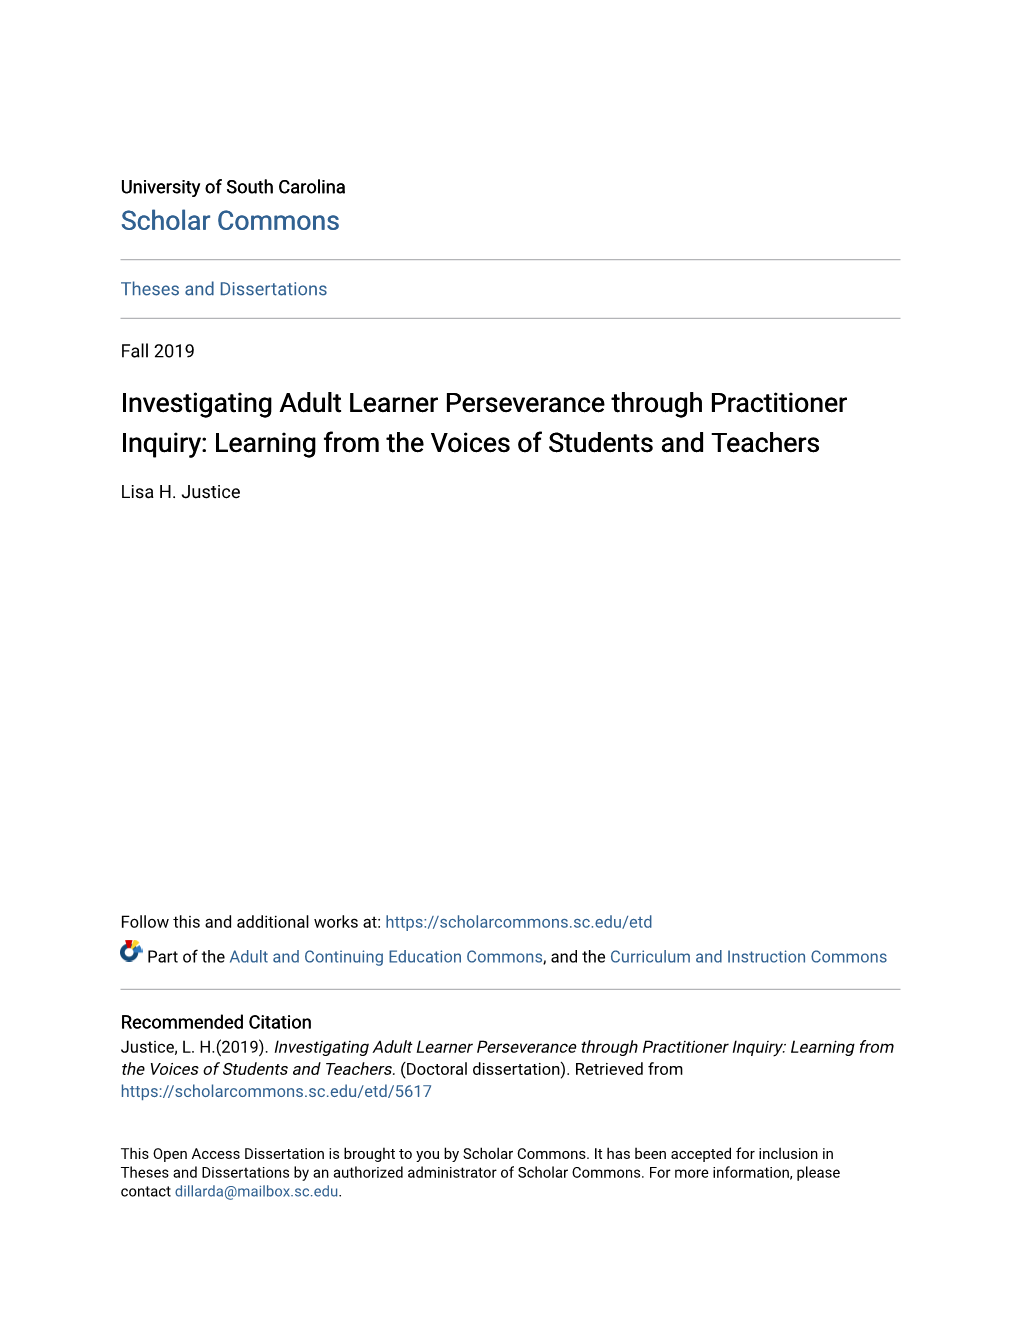 Investigating Adult Learner Perseverance Through Practitioner Inquiry: Learning from the Voices of Students and Teachers